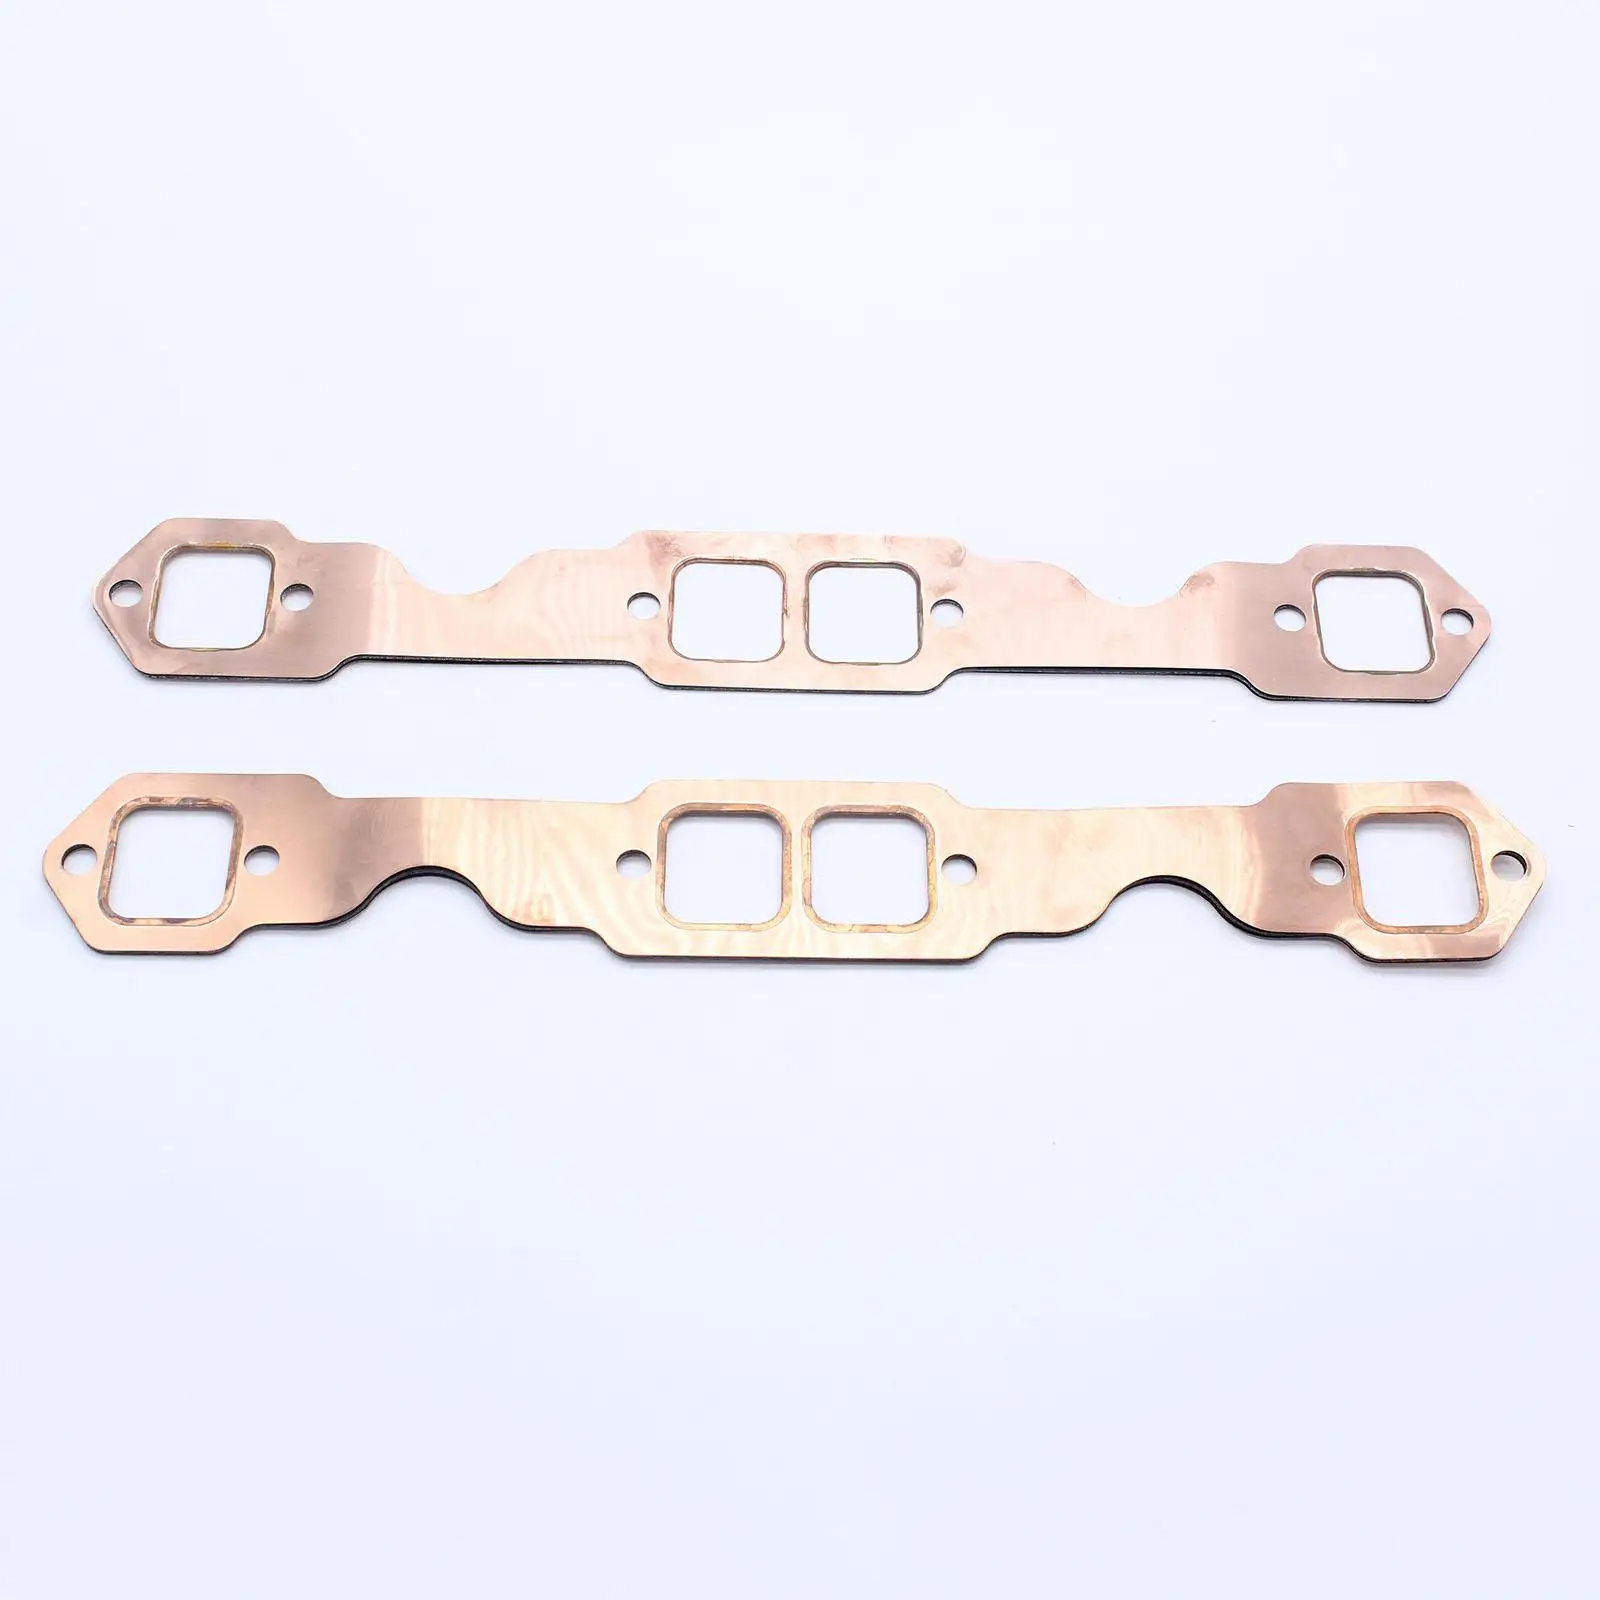 2x C Exhaust Gasket Seal for   327 305 350 383 Exhaust  Gasket Set Made of high reliable quality and durable material